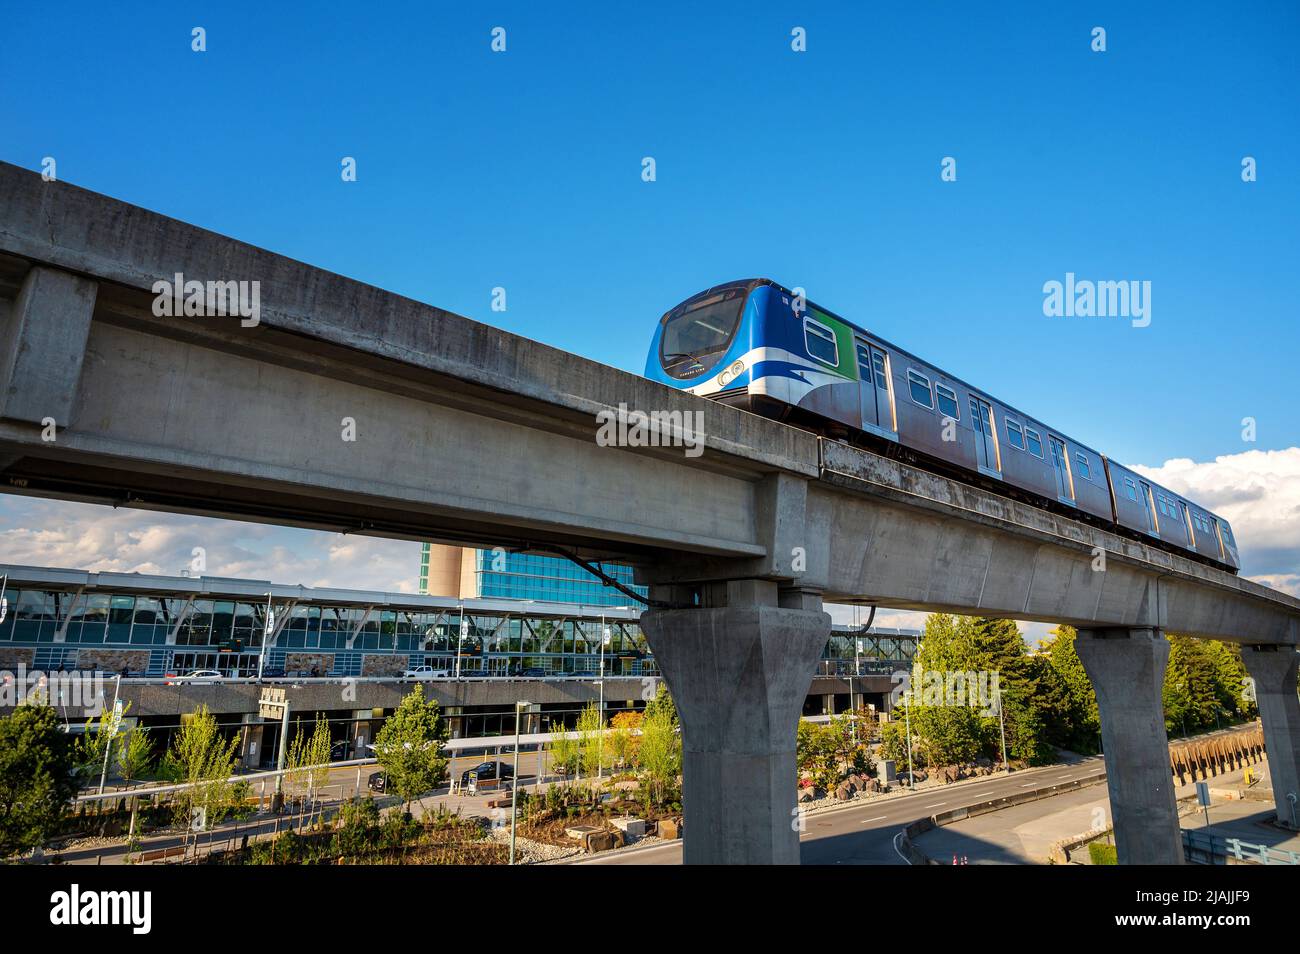 The Canada Line transit train rolls into the International terminal at Vancouver International Airport, or YVR.  Vancouver BC, Canada. Stock Photo